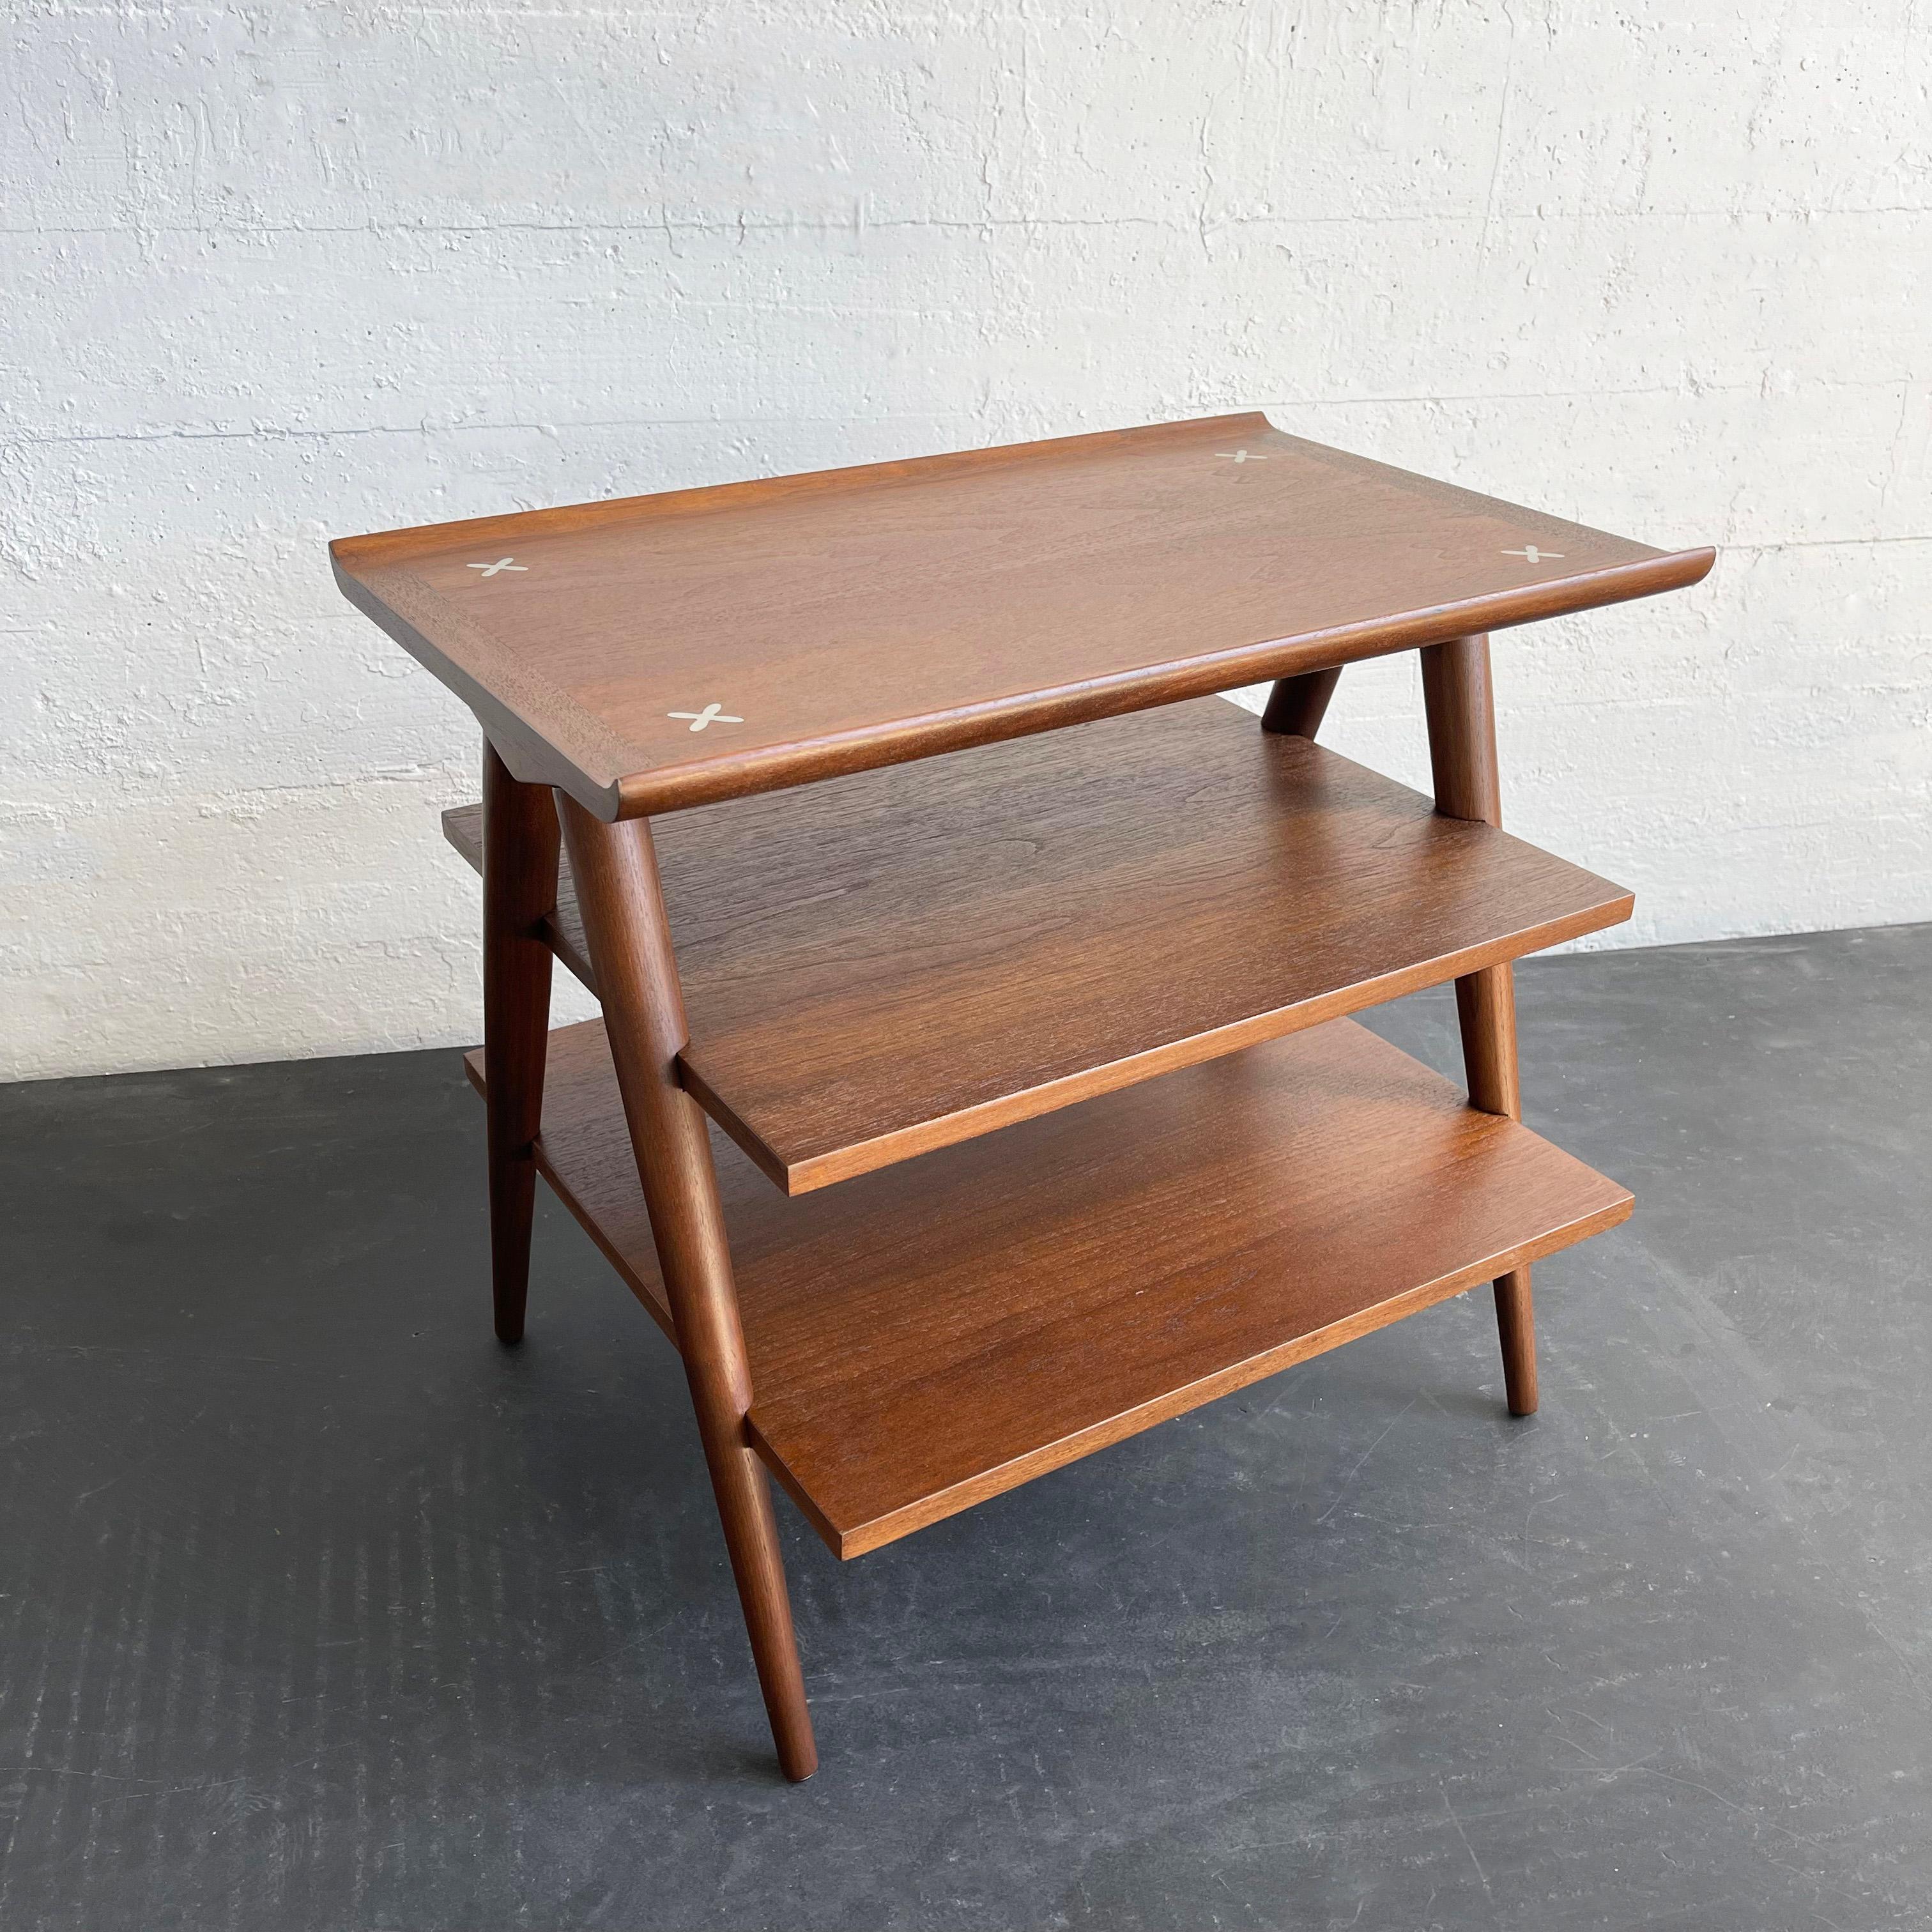 Sleek and sculptural, mid-century modern, walnut side table designed by Merton Gershun for American of Martinsville features slanted, tapered legs that support three tiers perfect for displaying books and magazines. A signature trait of Gershun’s is